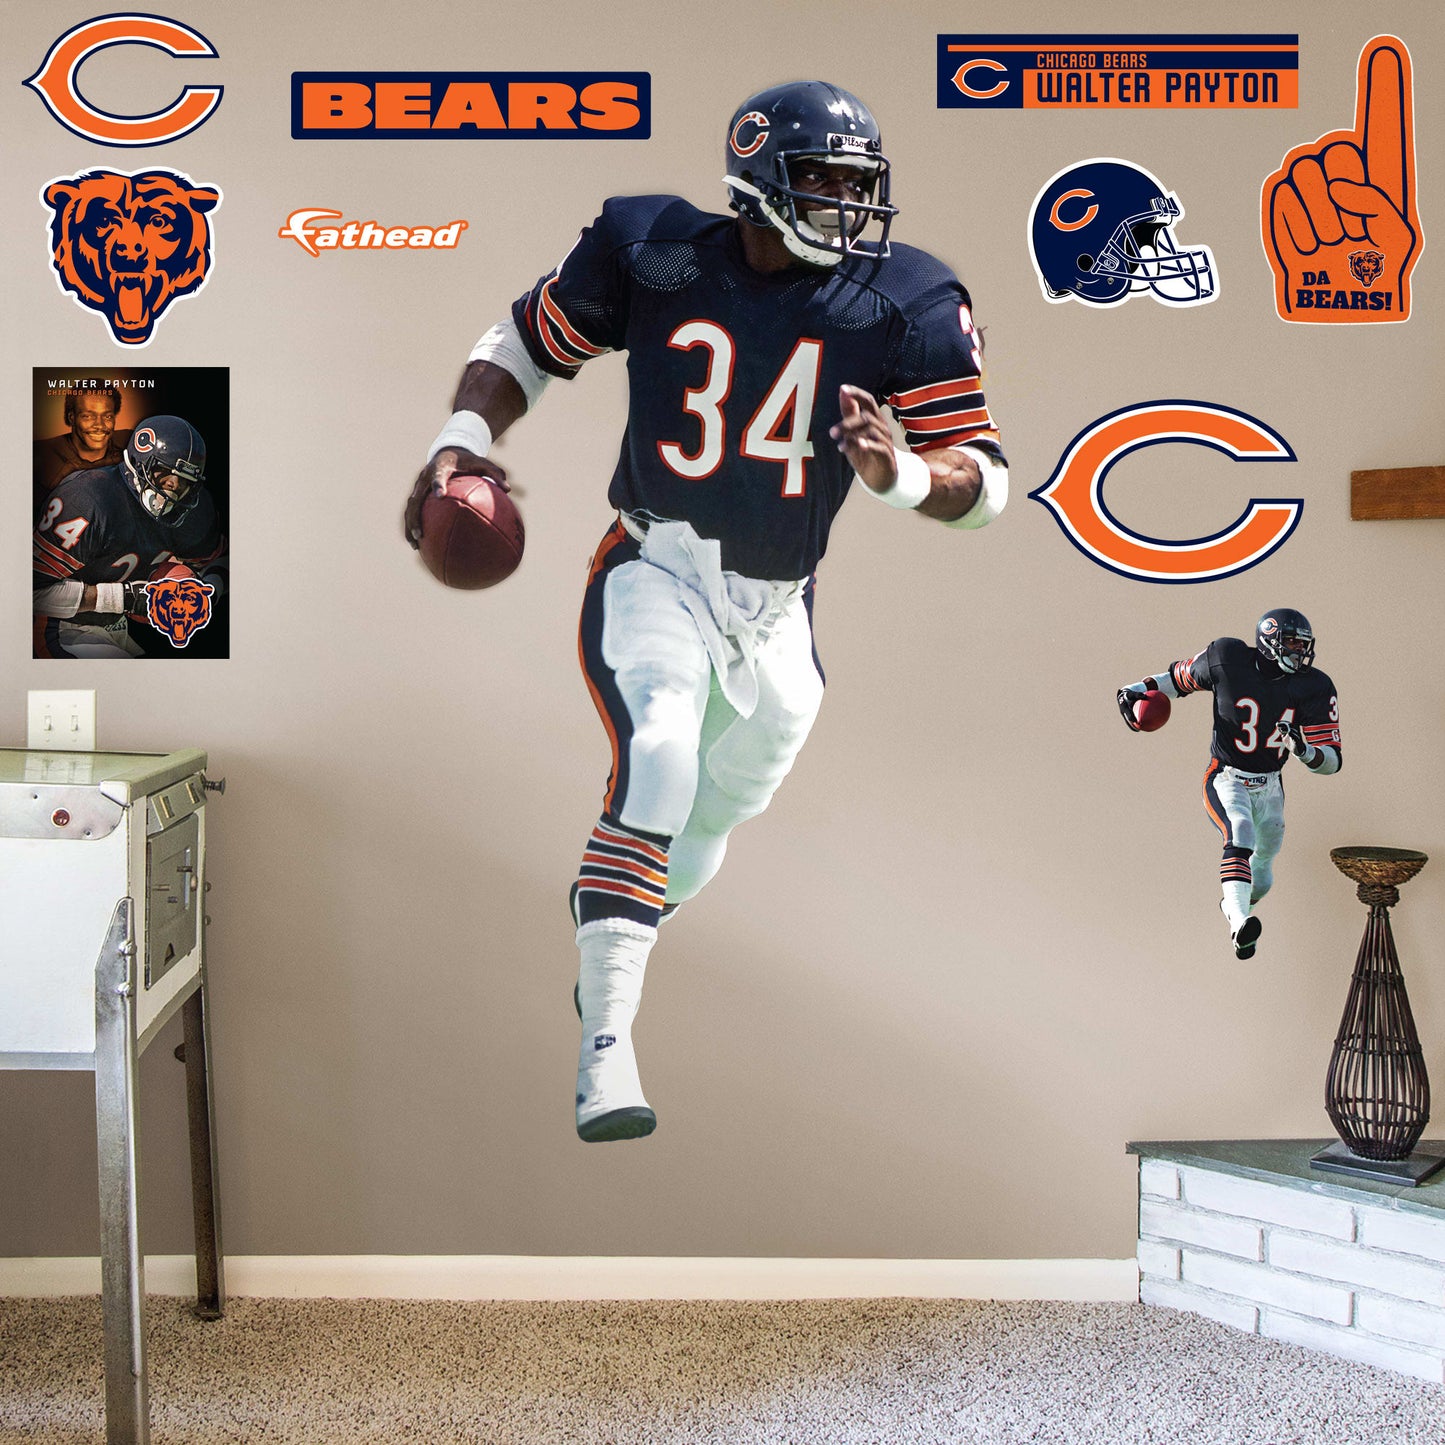 Life-Size Athlete + 9 Decals (44"W x 77"H) They called him Sweetness, a player whose heart was as big as his talent. A 9-time Pro Bowler and 1985 Super Bowl champion, Walter Payton widely is regarded as one of the greatest running backs of all time. Now fans of Da Bears can honor the late Hall of Famer with a removable wall decal set. Perfect for a bedroom or bonus room, the heavy-duty vinyl decals are easy to attach and remove. Bear down!